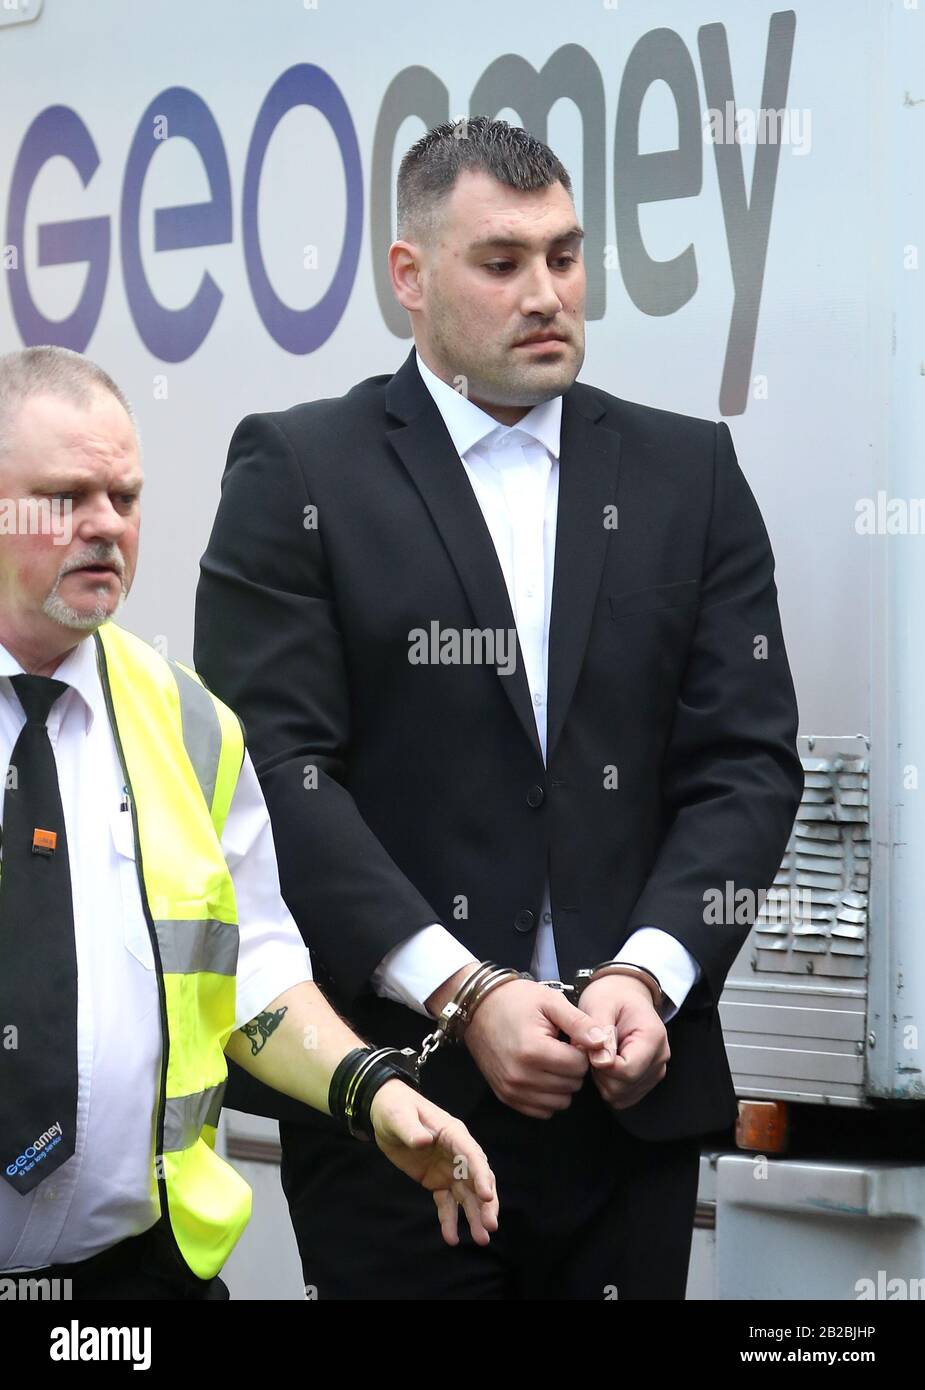 Michael Roe arriving at Lewes Crown Court where he is charged with the murder of a child under one year old between September 8 and 11 2018; wounding or inflicting grievous bodily harm without intent and causing or allowing the death of a child, in connection with the death of his daughter, Holly. PA Photo. Picture date: Monday March 2, 2020. See PA story COURTS Crowborough. Photo credit should read: Gareth Fuller/PA Wire Stock Photo